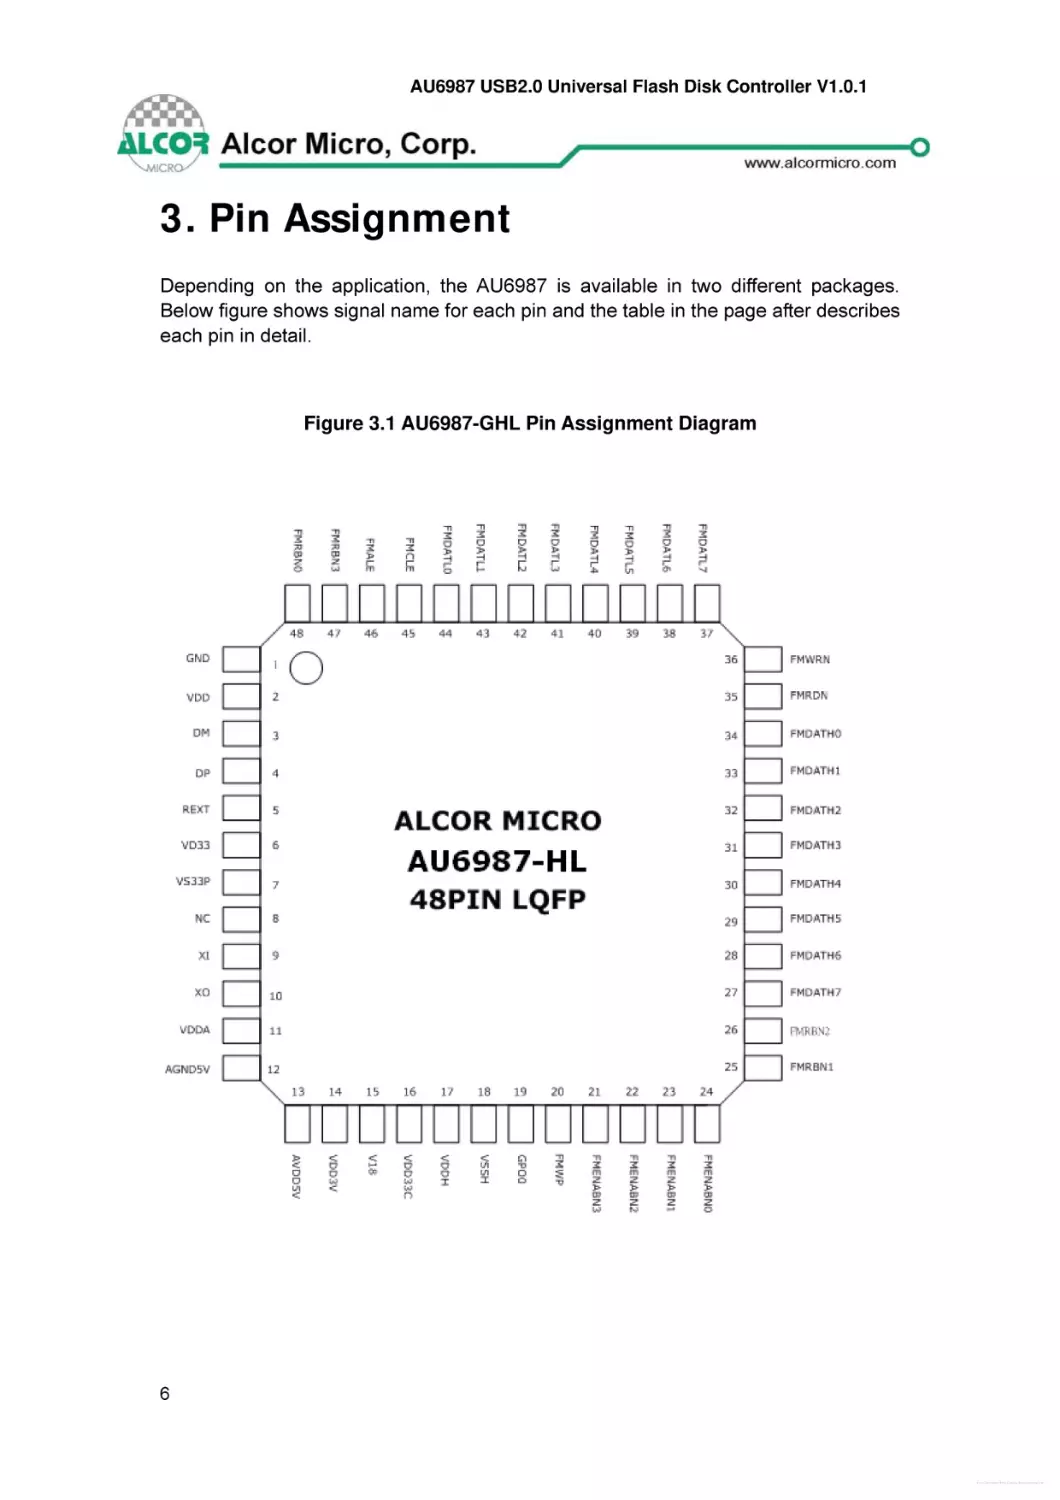 3. Pin Assignment
Figure 3.1 AU6987-GHL Pin Assignment Diagram